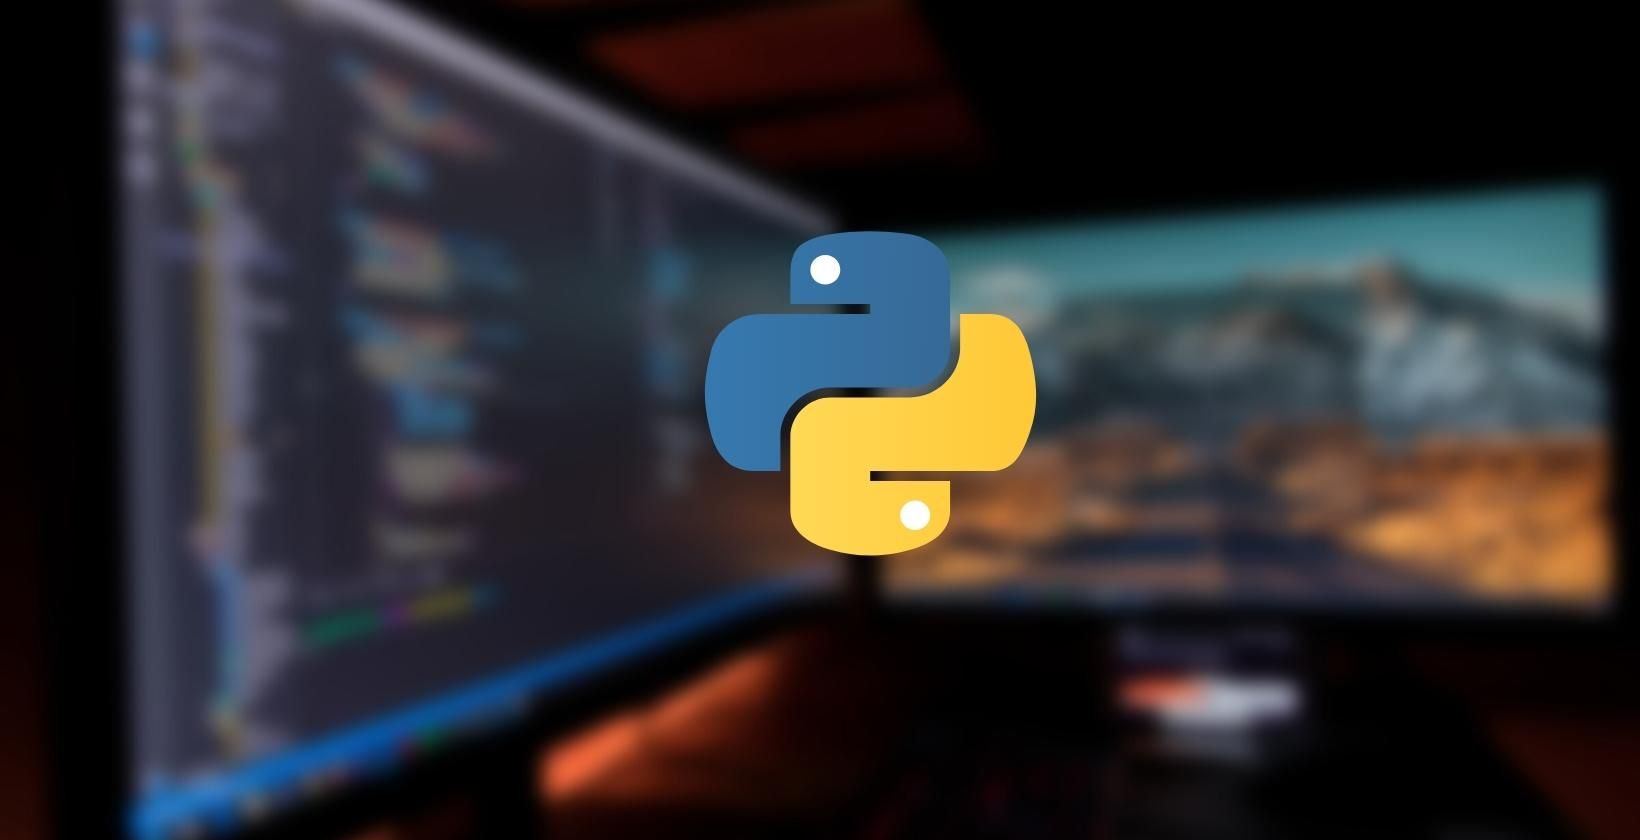 A dual monitor setup with the Python logo superimposed in the foreground